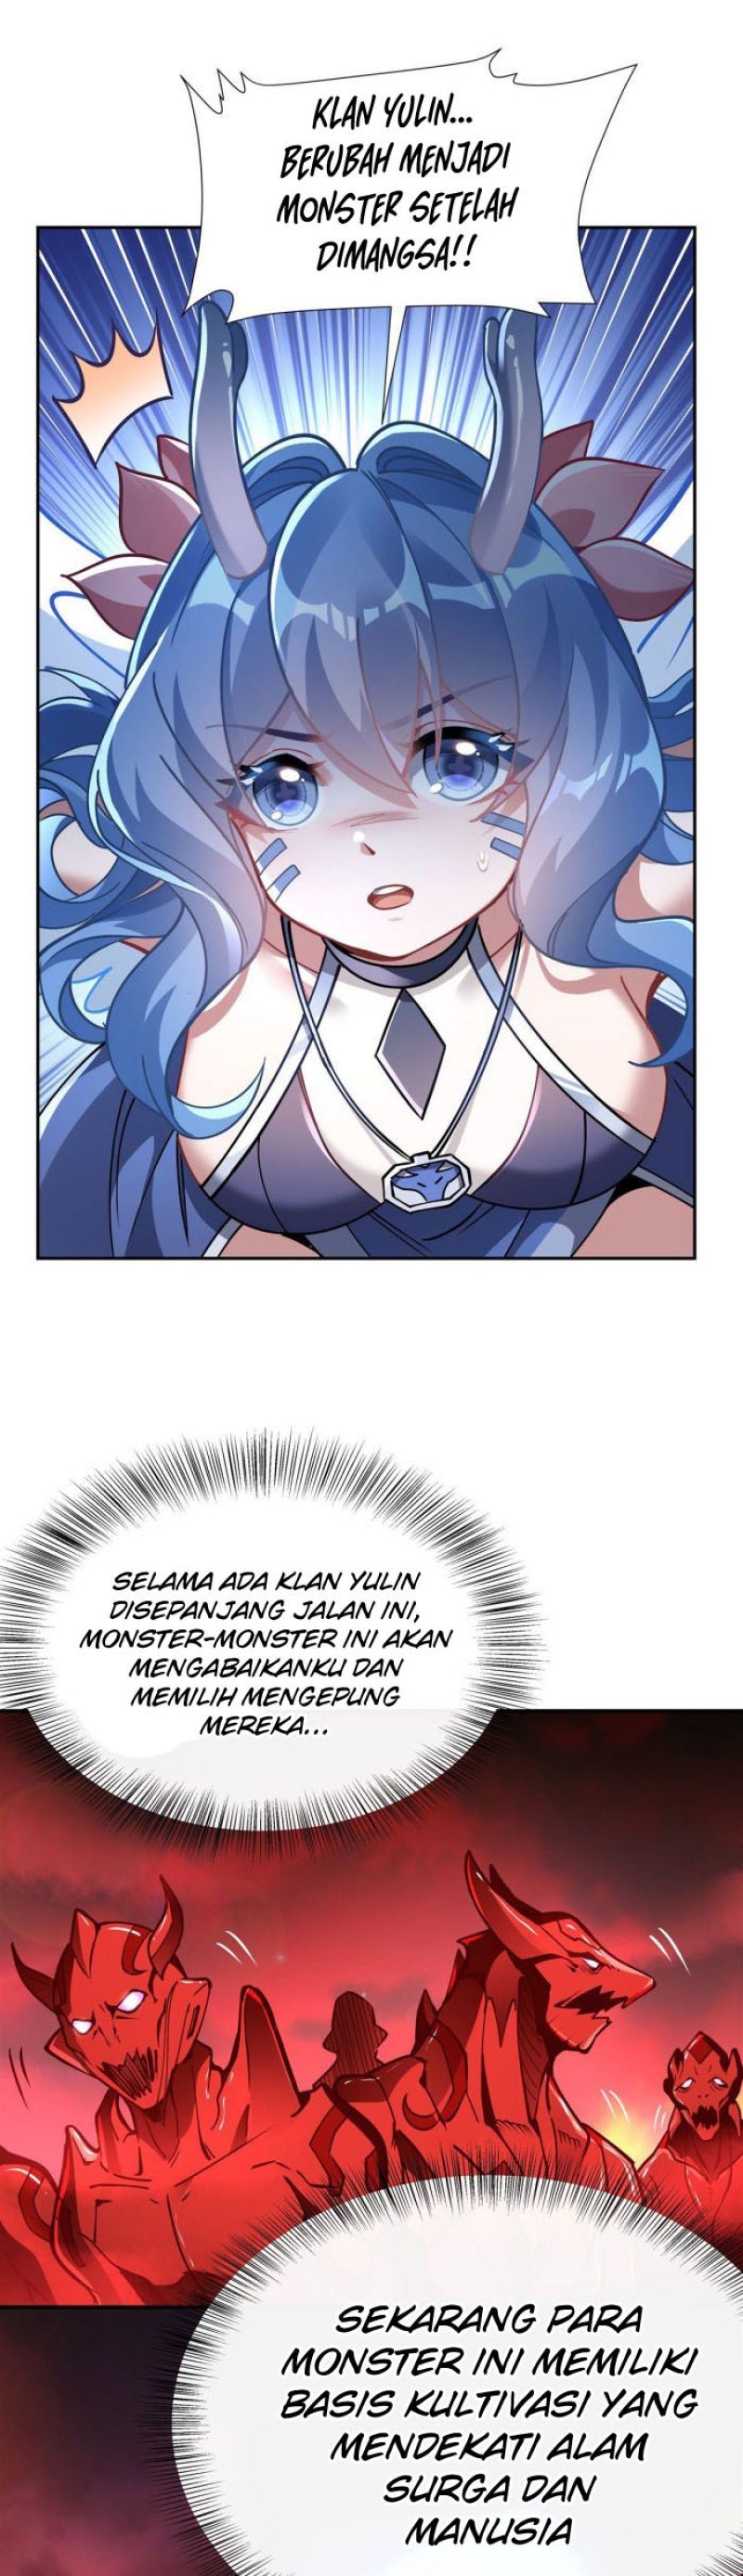 Dilarang COPAS - situs resmi www.mangacanblog.com - Komik my female apprentices are all big shots from the future 123 - chapter 123 124 Indonesia my female apprentices are all big shots from the future 123 - chapter 123 Terbaru 11|Baca Manga Komik Indonesia|Mangacan